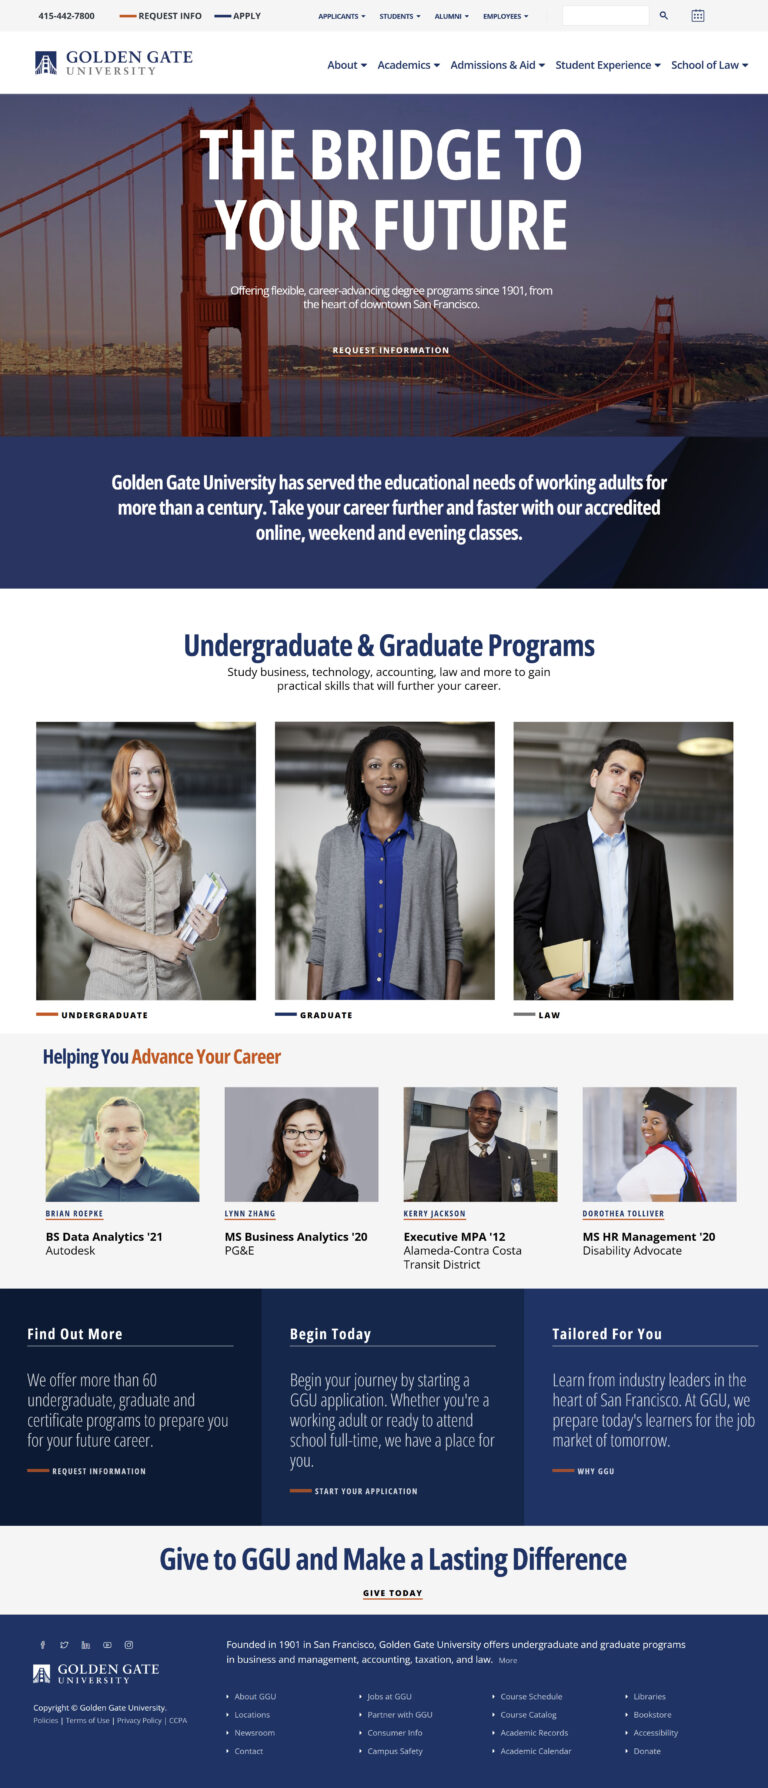 An image of the home page on the Golden Gate University website.